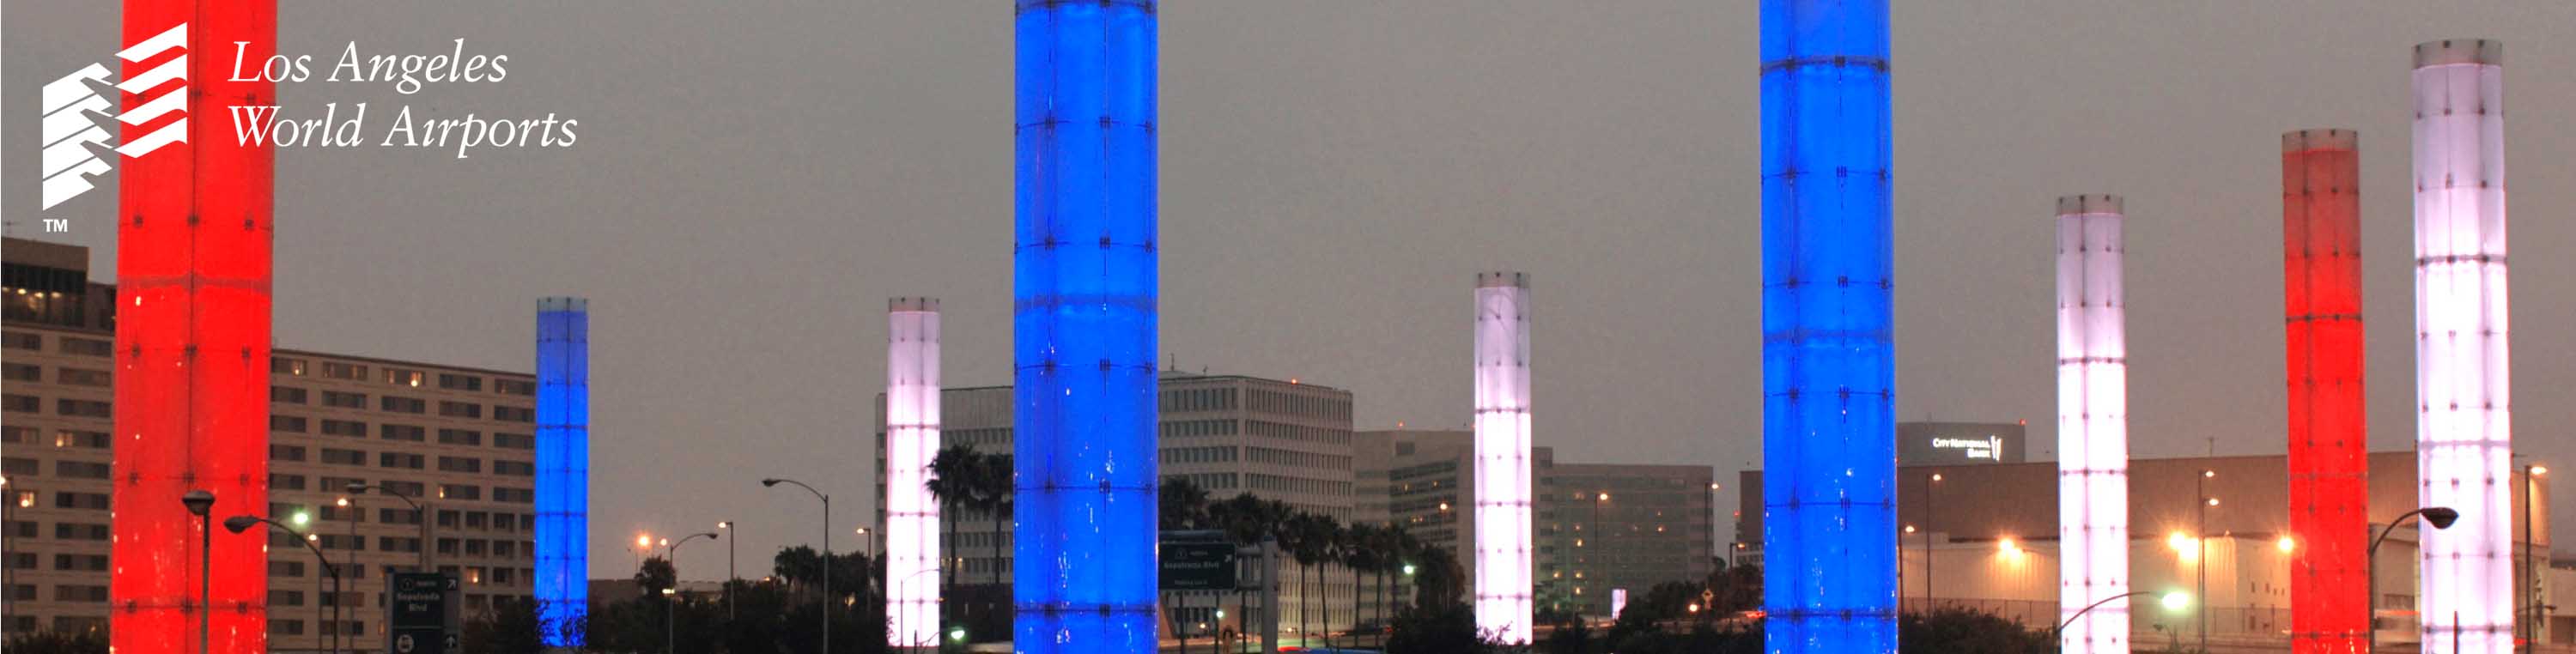 Header image showing pylons in red, blue and white color